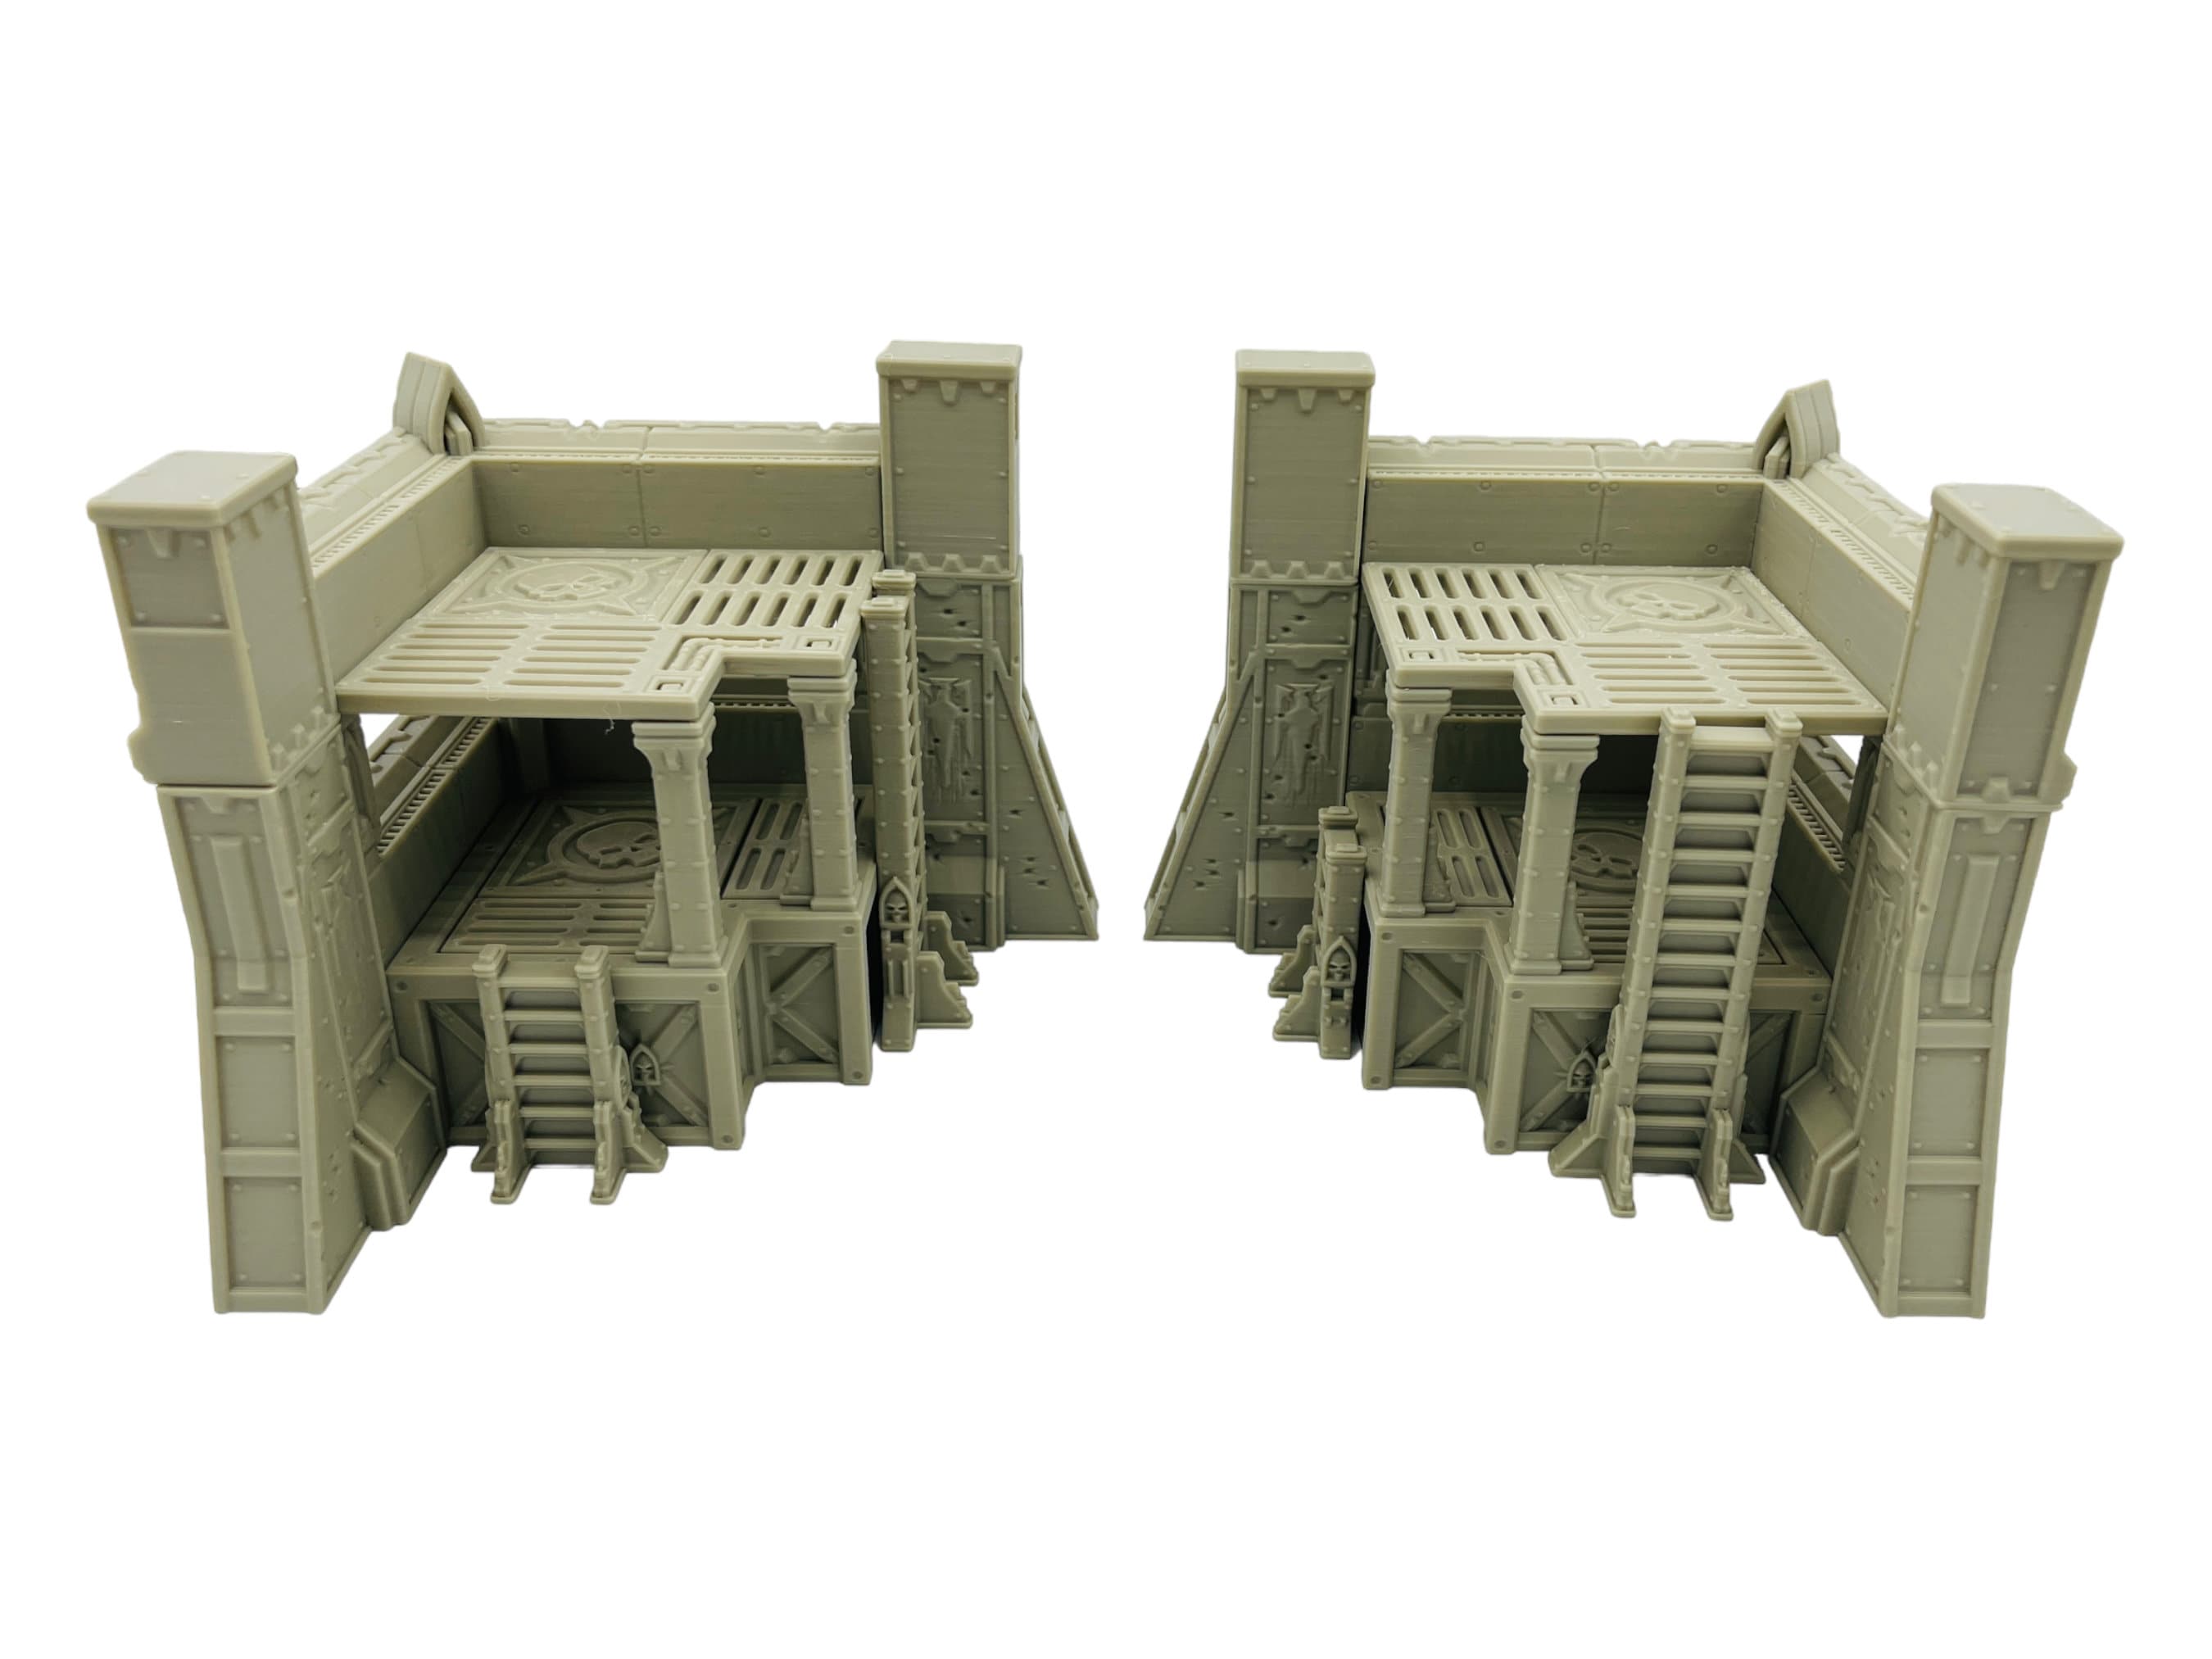 Ruins of the Empire Fortification 1 / Forbidden Prints / RPG and Wargame 3d Printed Tabletop Terrain / Licensed Printer